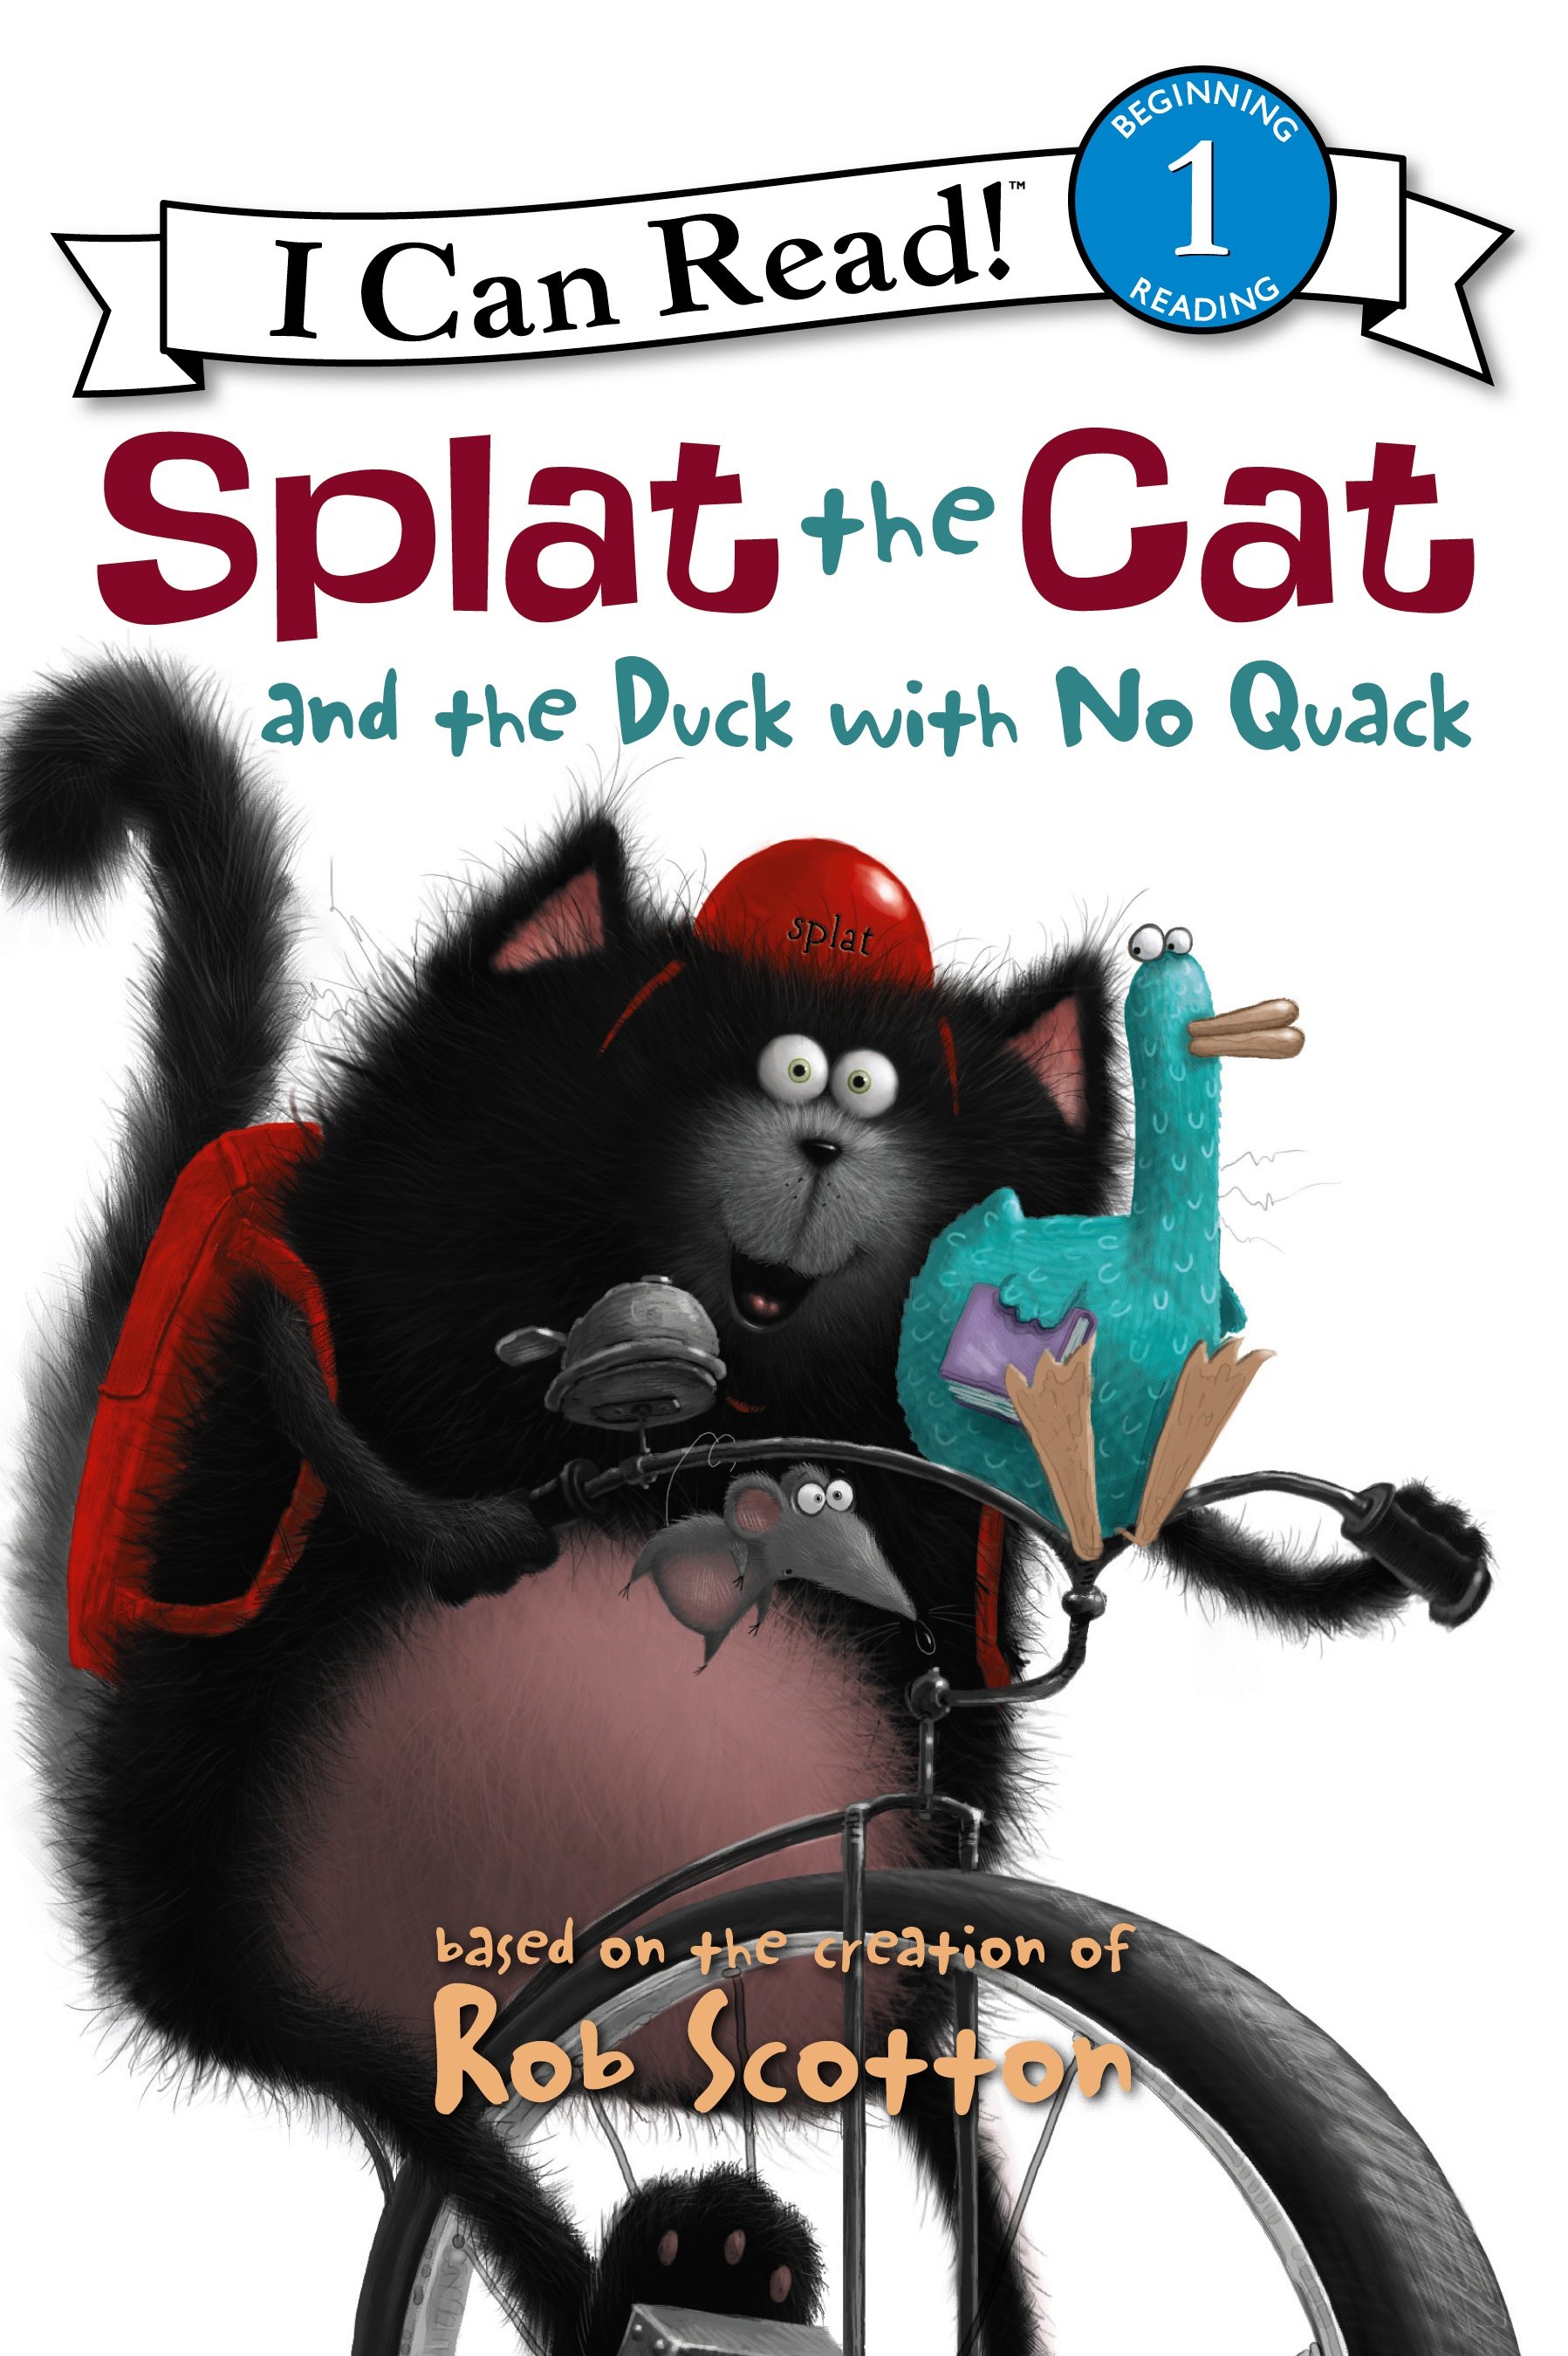 Splat the Cat and the duck with no quack based on the bestselling books by Rob Scotton ; cover art and text by Rob Scotton ; interior illustrations by Robert Eberz. cover